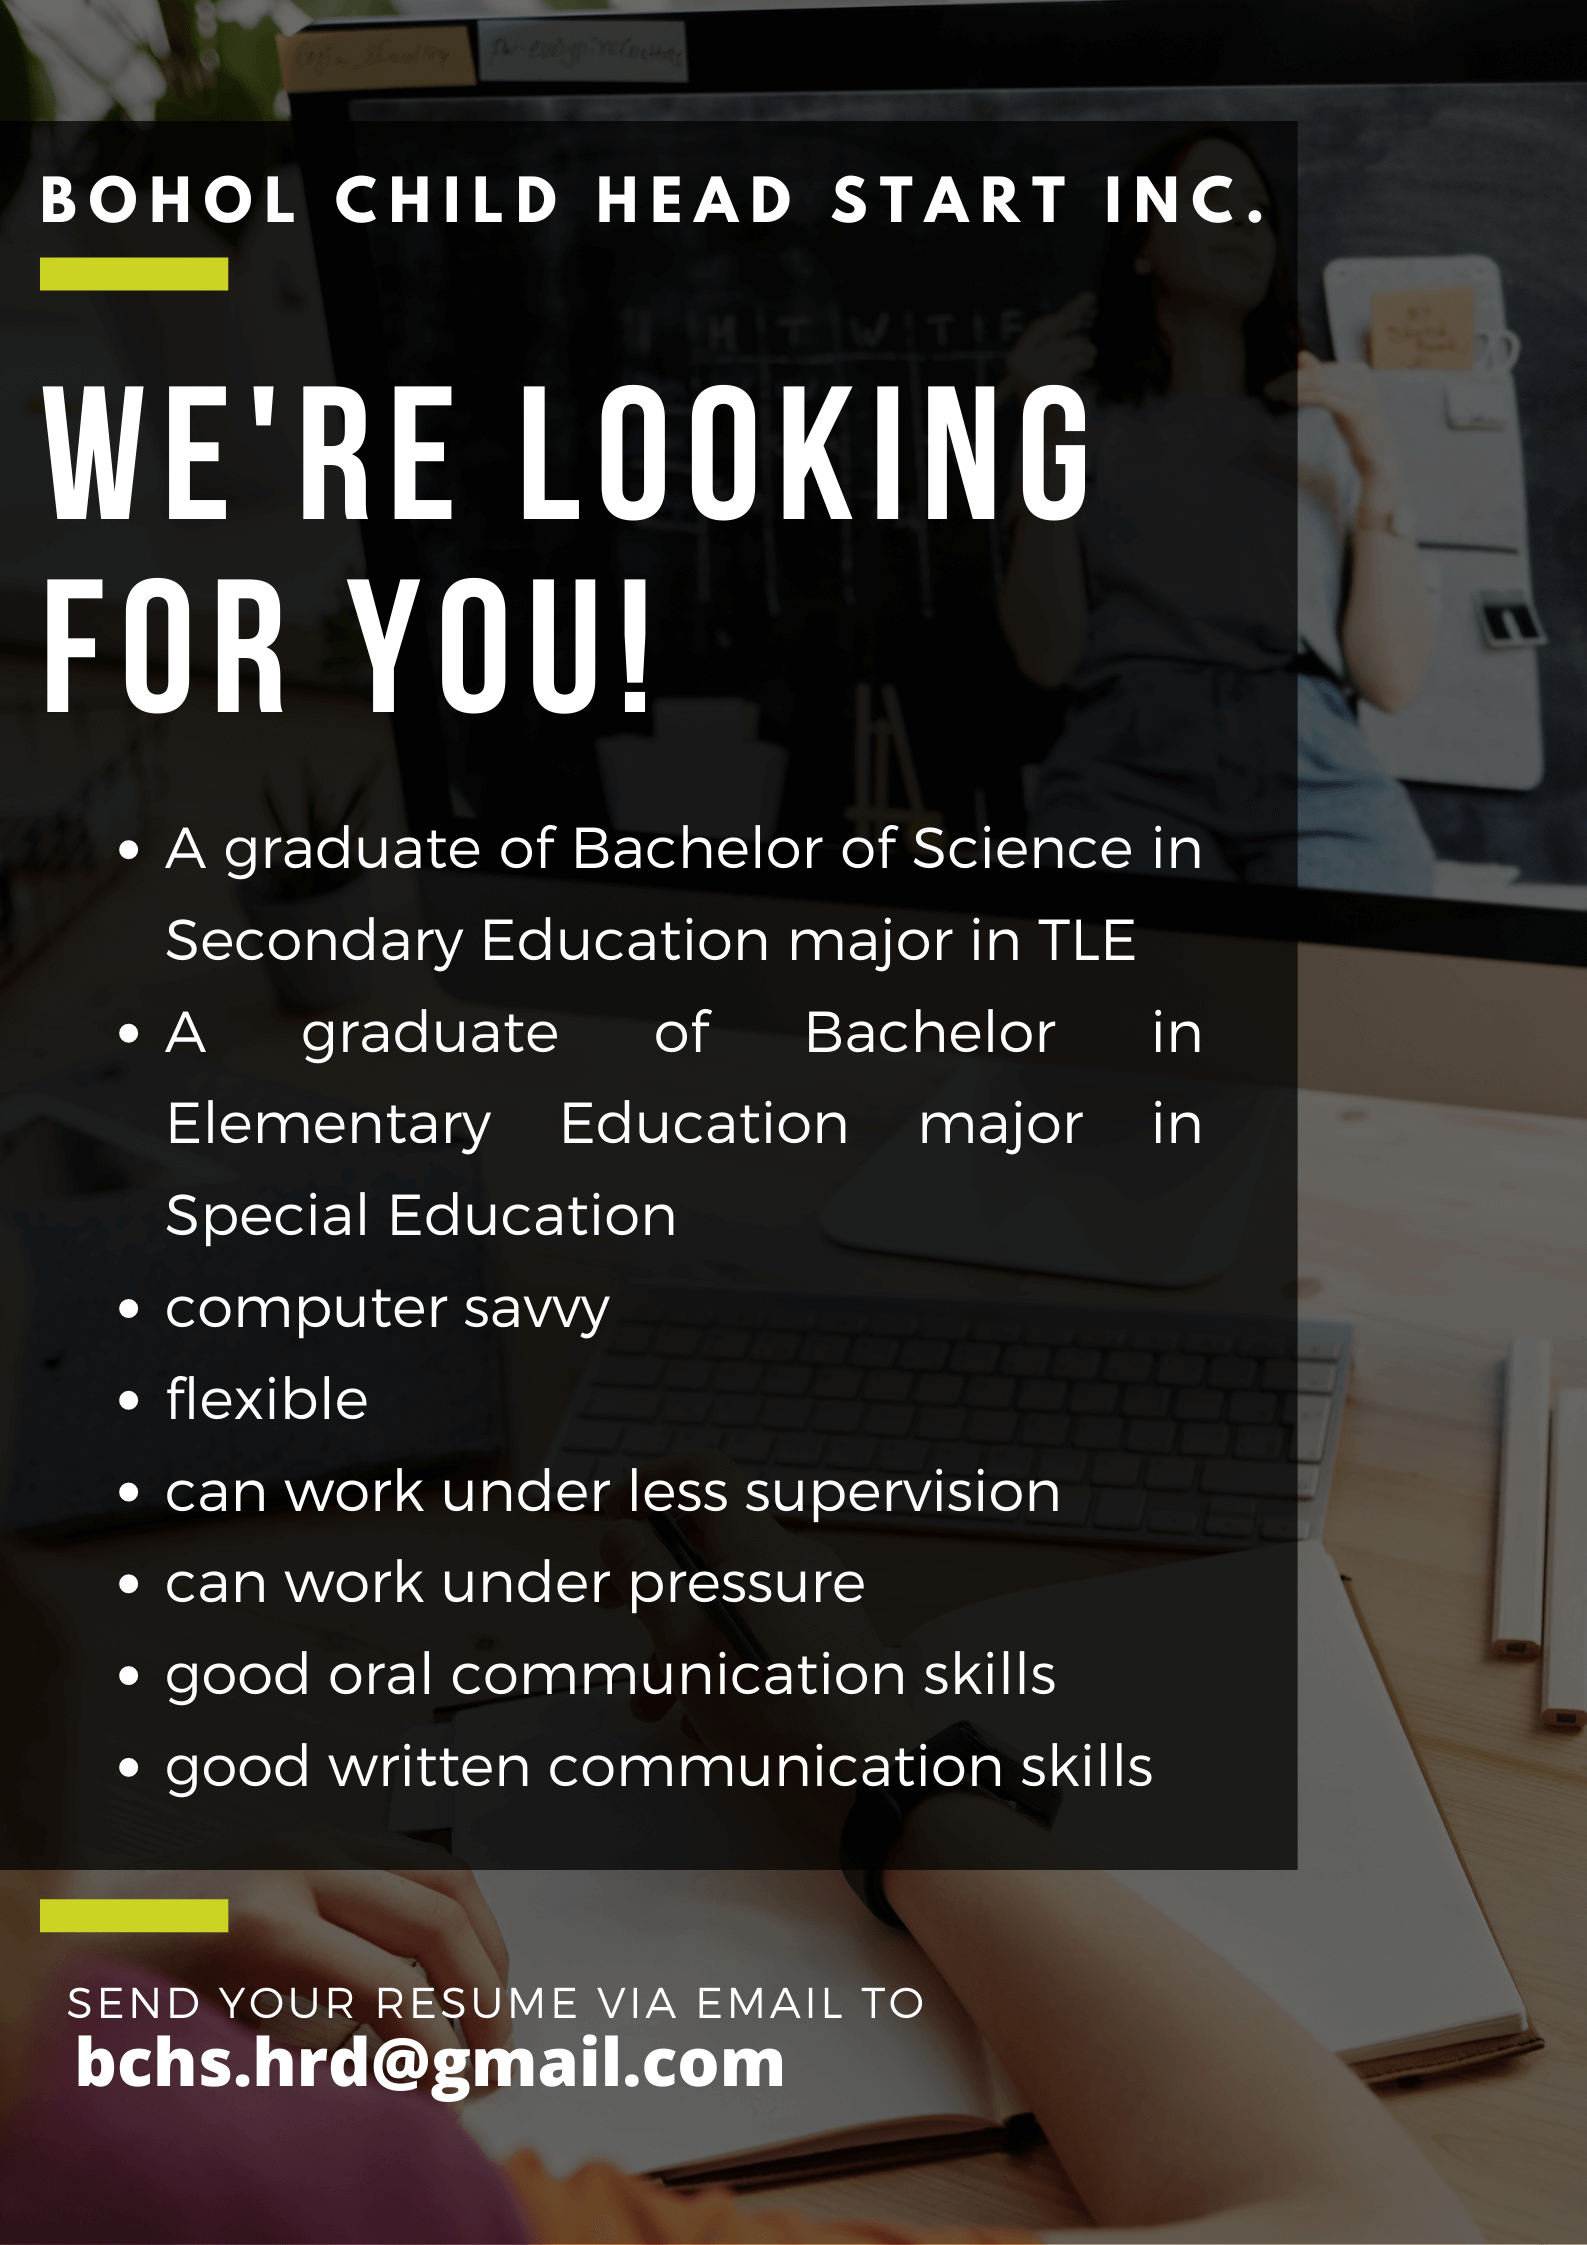 We’re Looking For You!